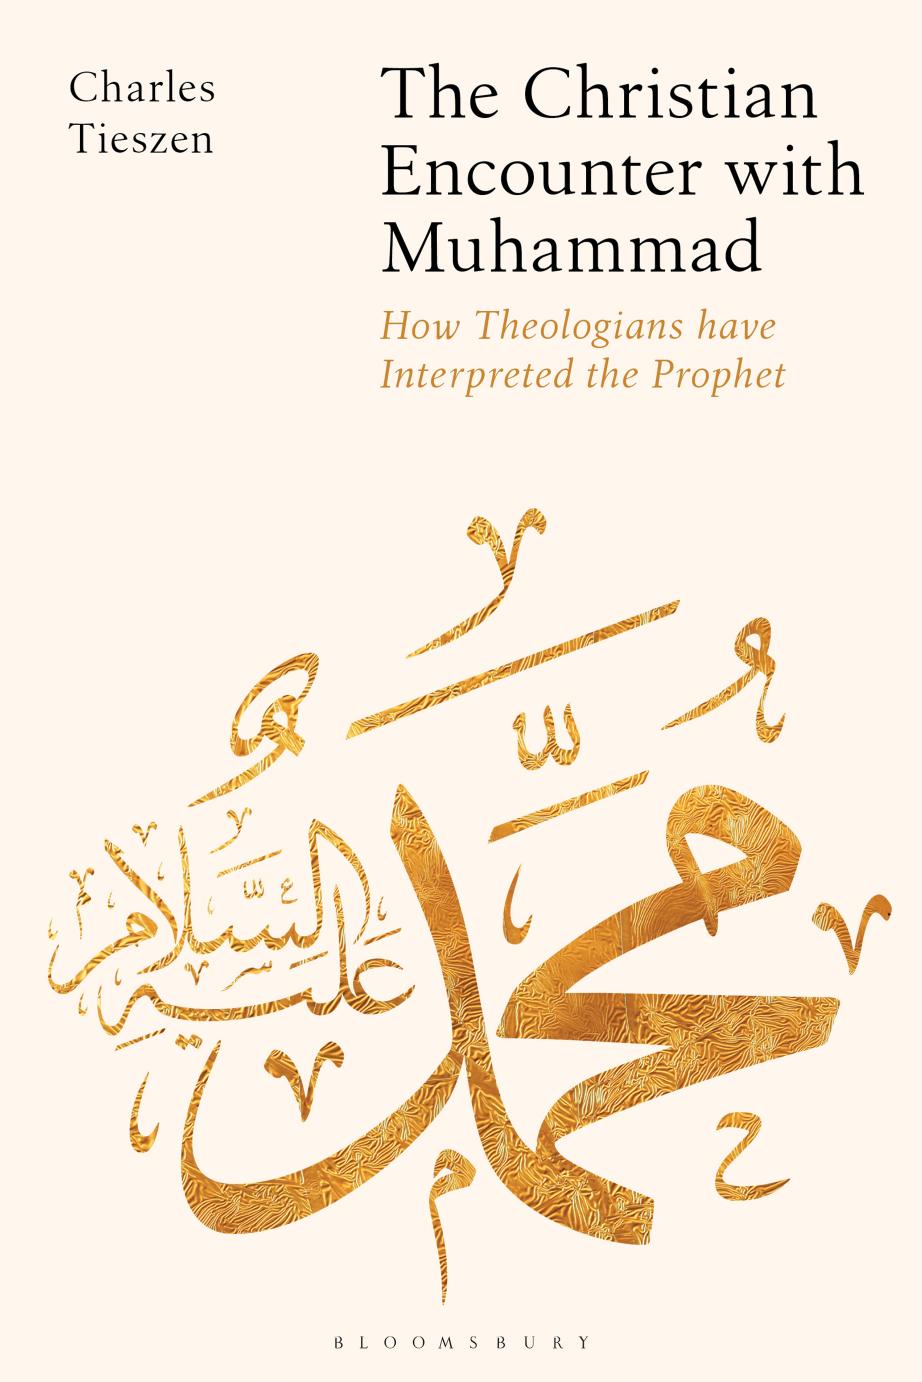 The Christian Encounter with Muhammad: How Theologians Have Interpreted the Prophet by Charles Tieszen